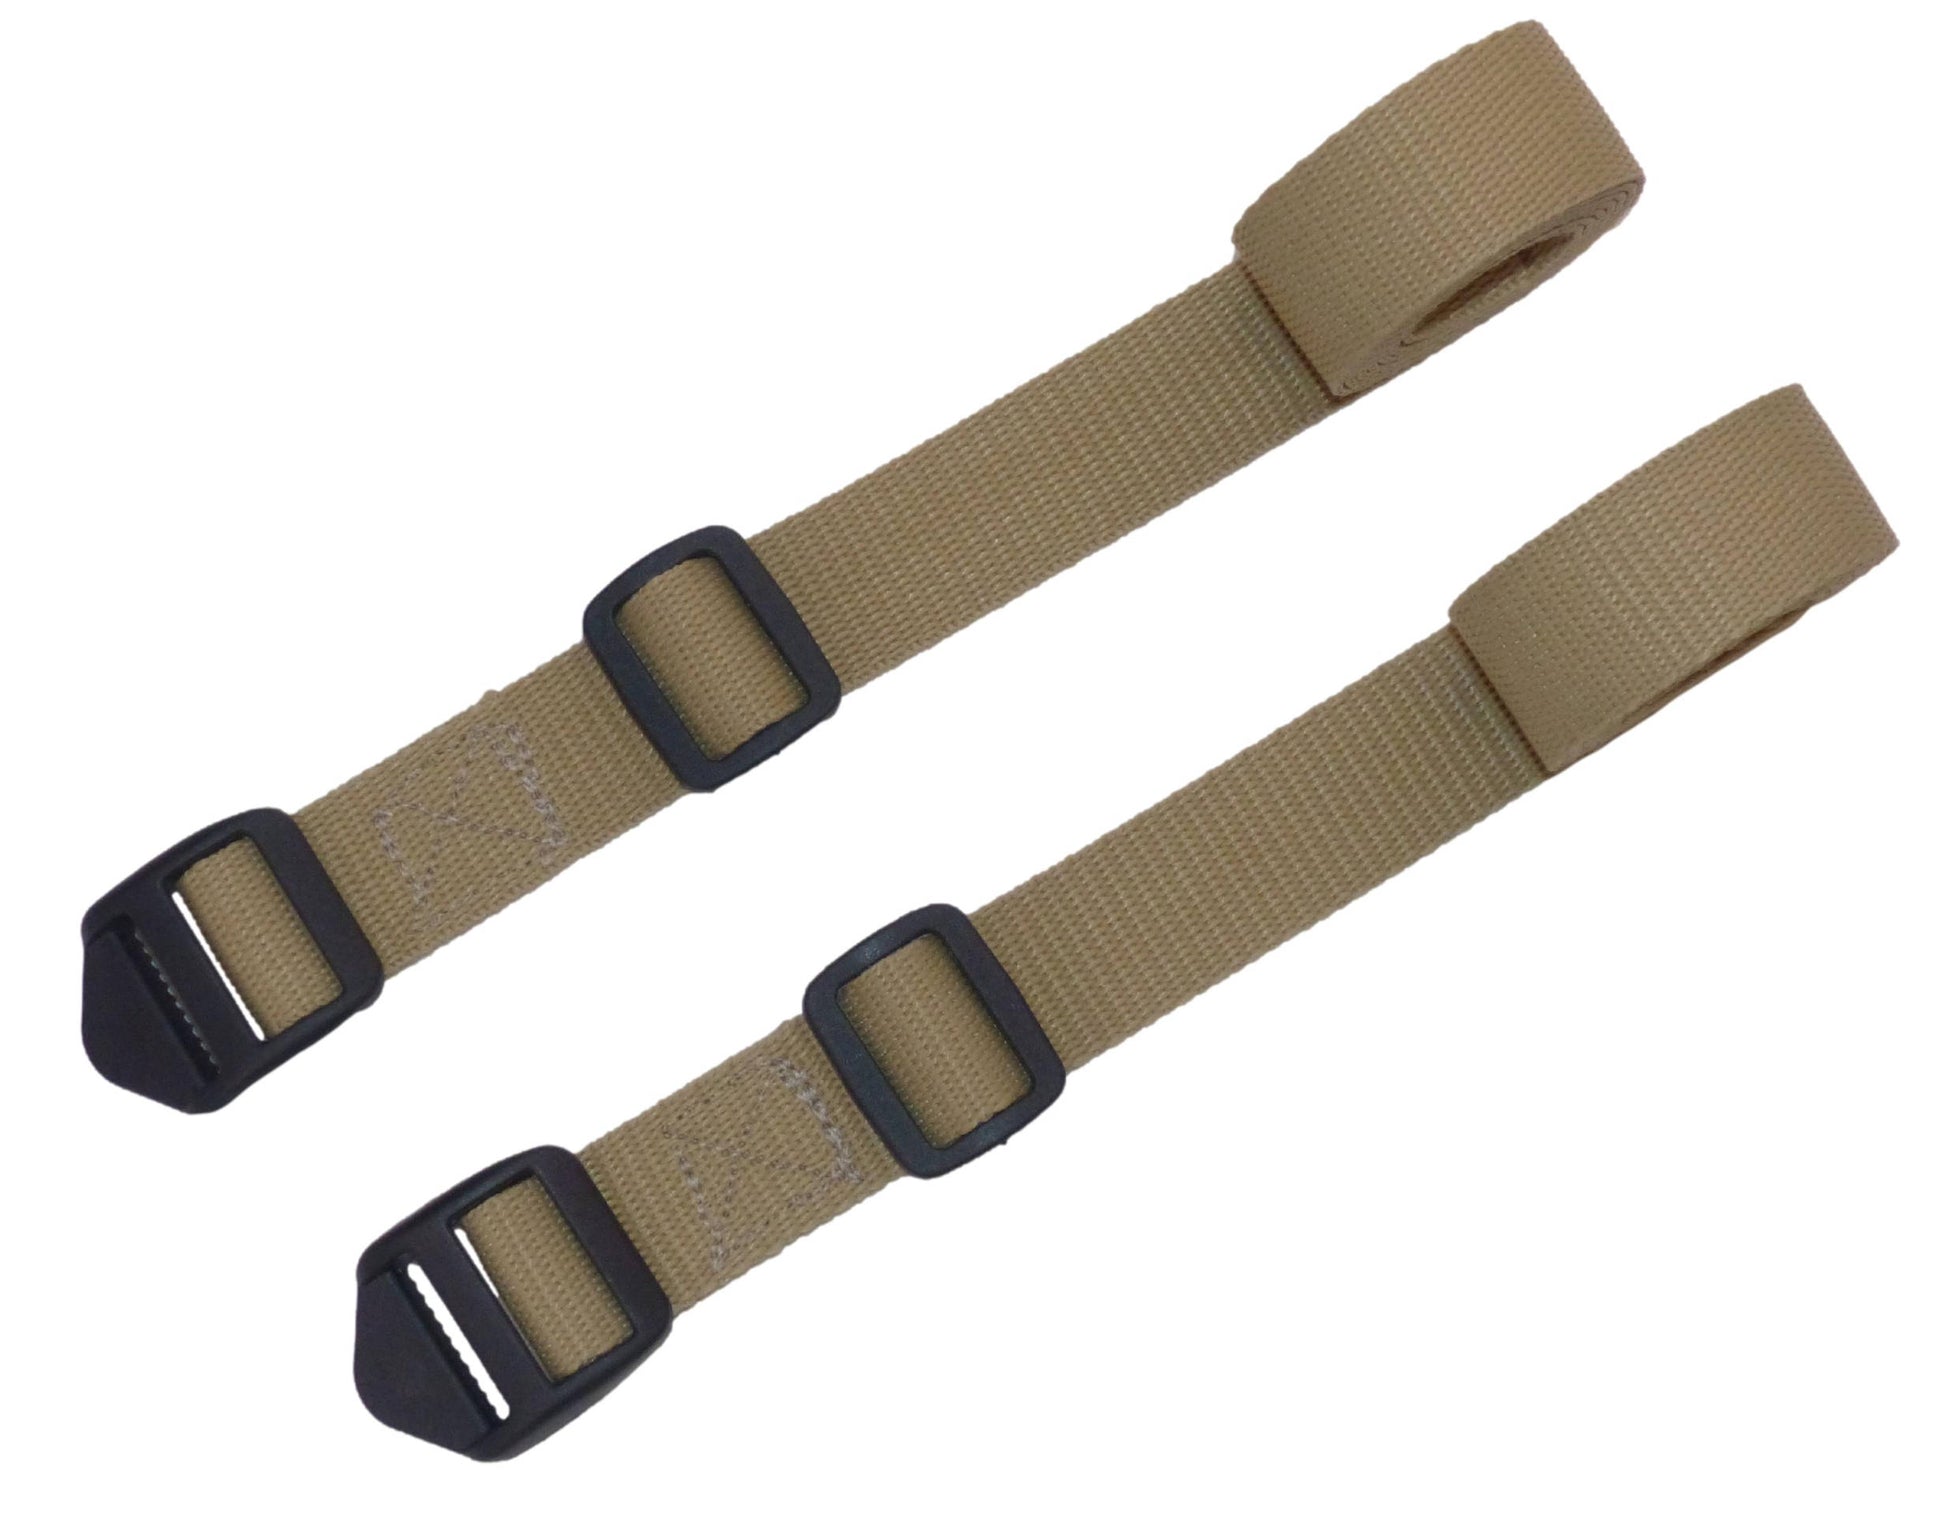 The Benristraps 25mm Camping Straps, 150cm (pair) in beige